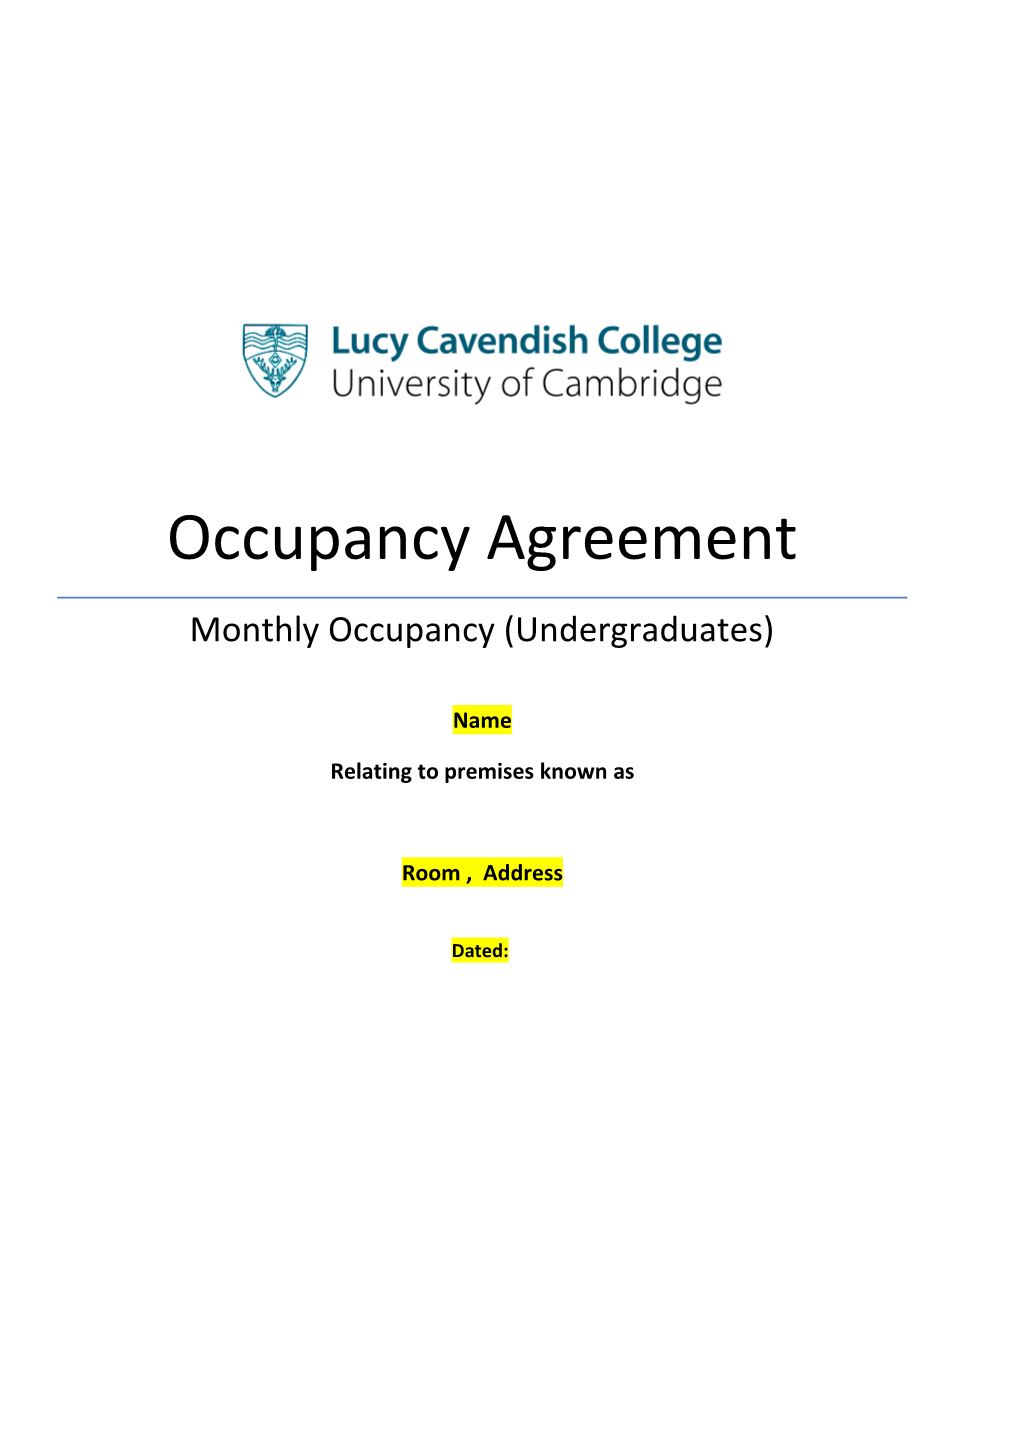 Monthly Occupancy Agreement for Undergraduates